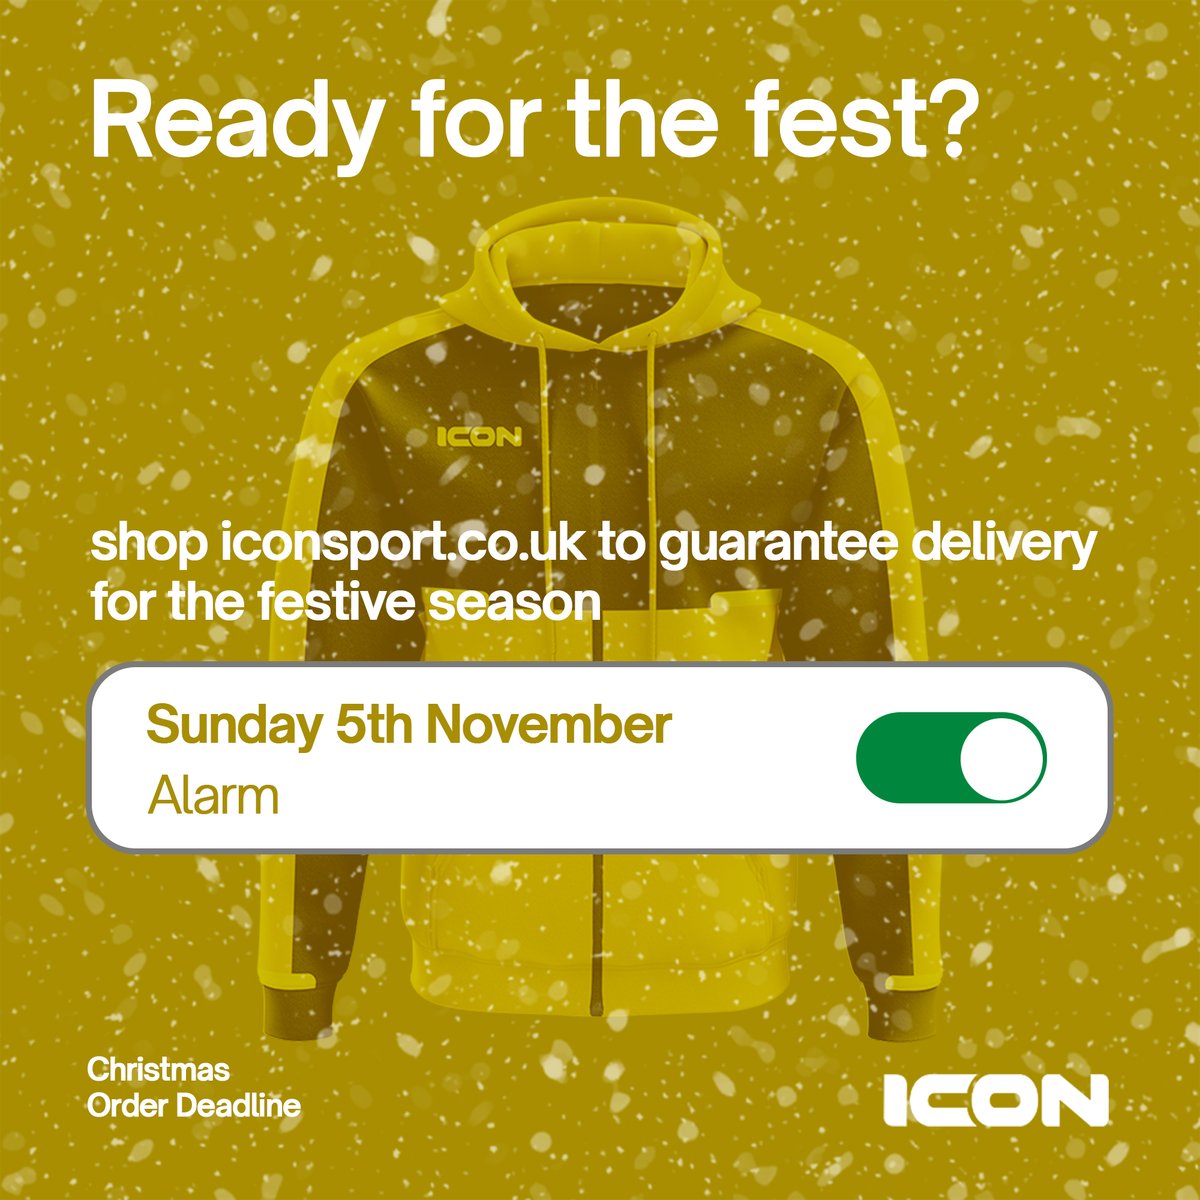 Everything ready for the holiday? 1 WEEK left until our Christmas Order Deadline! 🕛⏰ Order now to get your bespoke teamwear delivered in time for Christmas. ❓Got a question? DM us or email: sales@iconsports.co.uk #iconsports #iconsportsuk #teamwear #strengthinunity